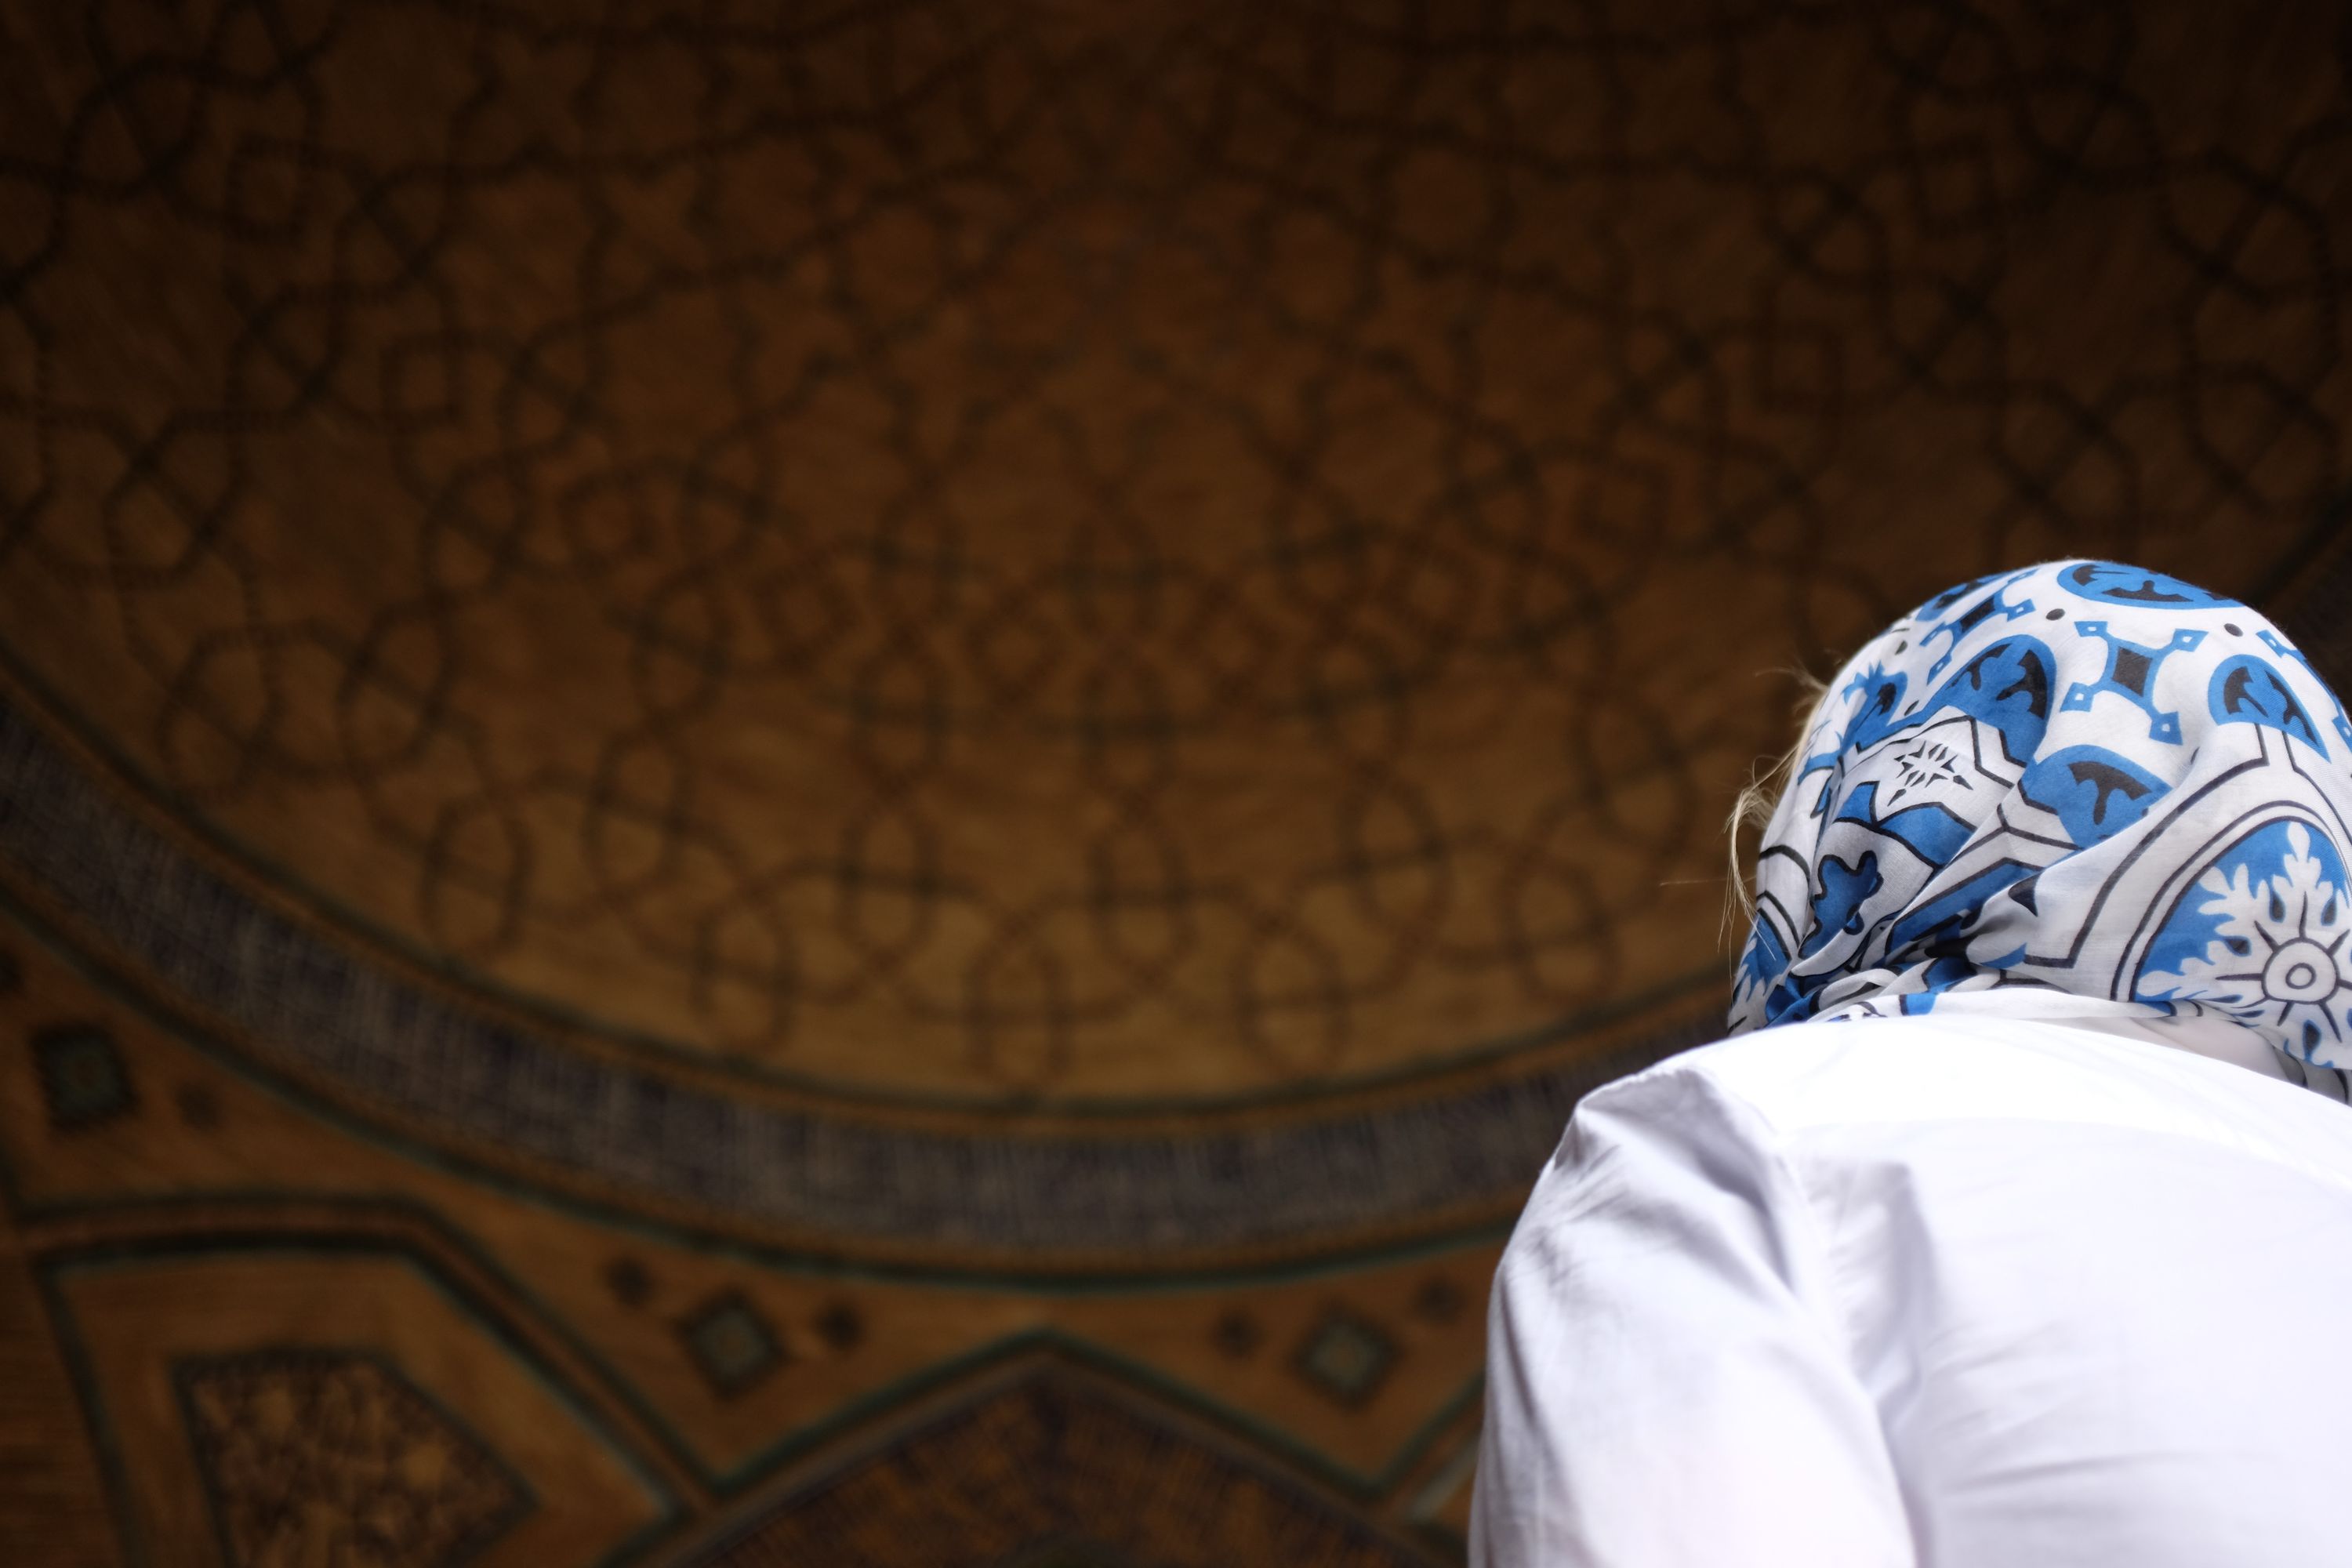 A woman in a blue headscarf and a white shirt looks up at the intricately patterned ceiling of a mosque.